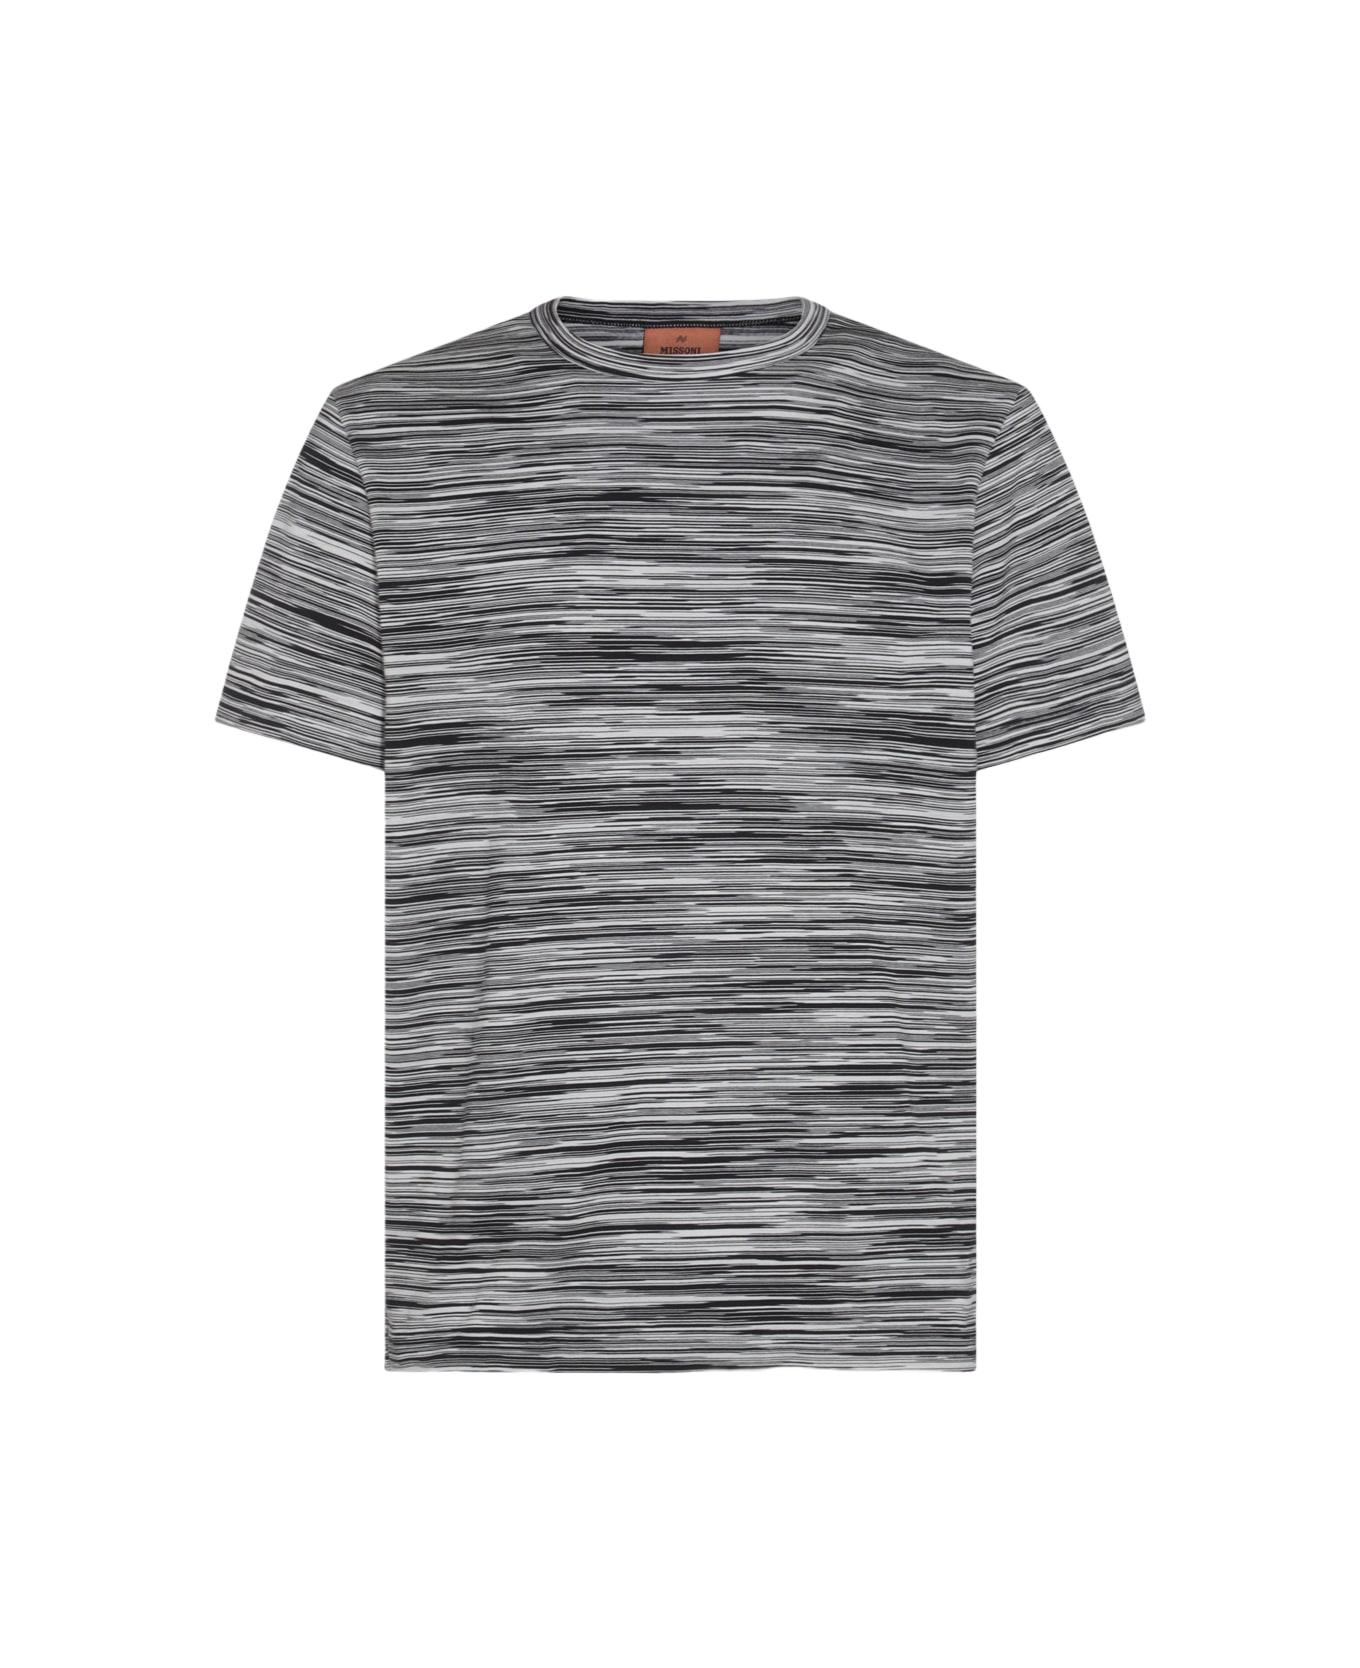 Missoni Multicolor Cotton T-shirt - SPACE DYED BLACK AND WHITE シャツ